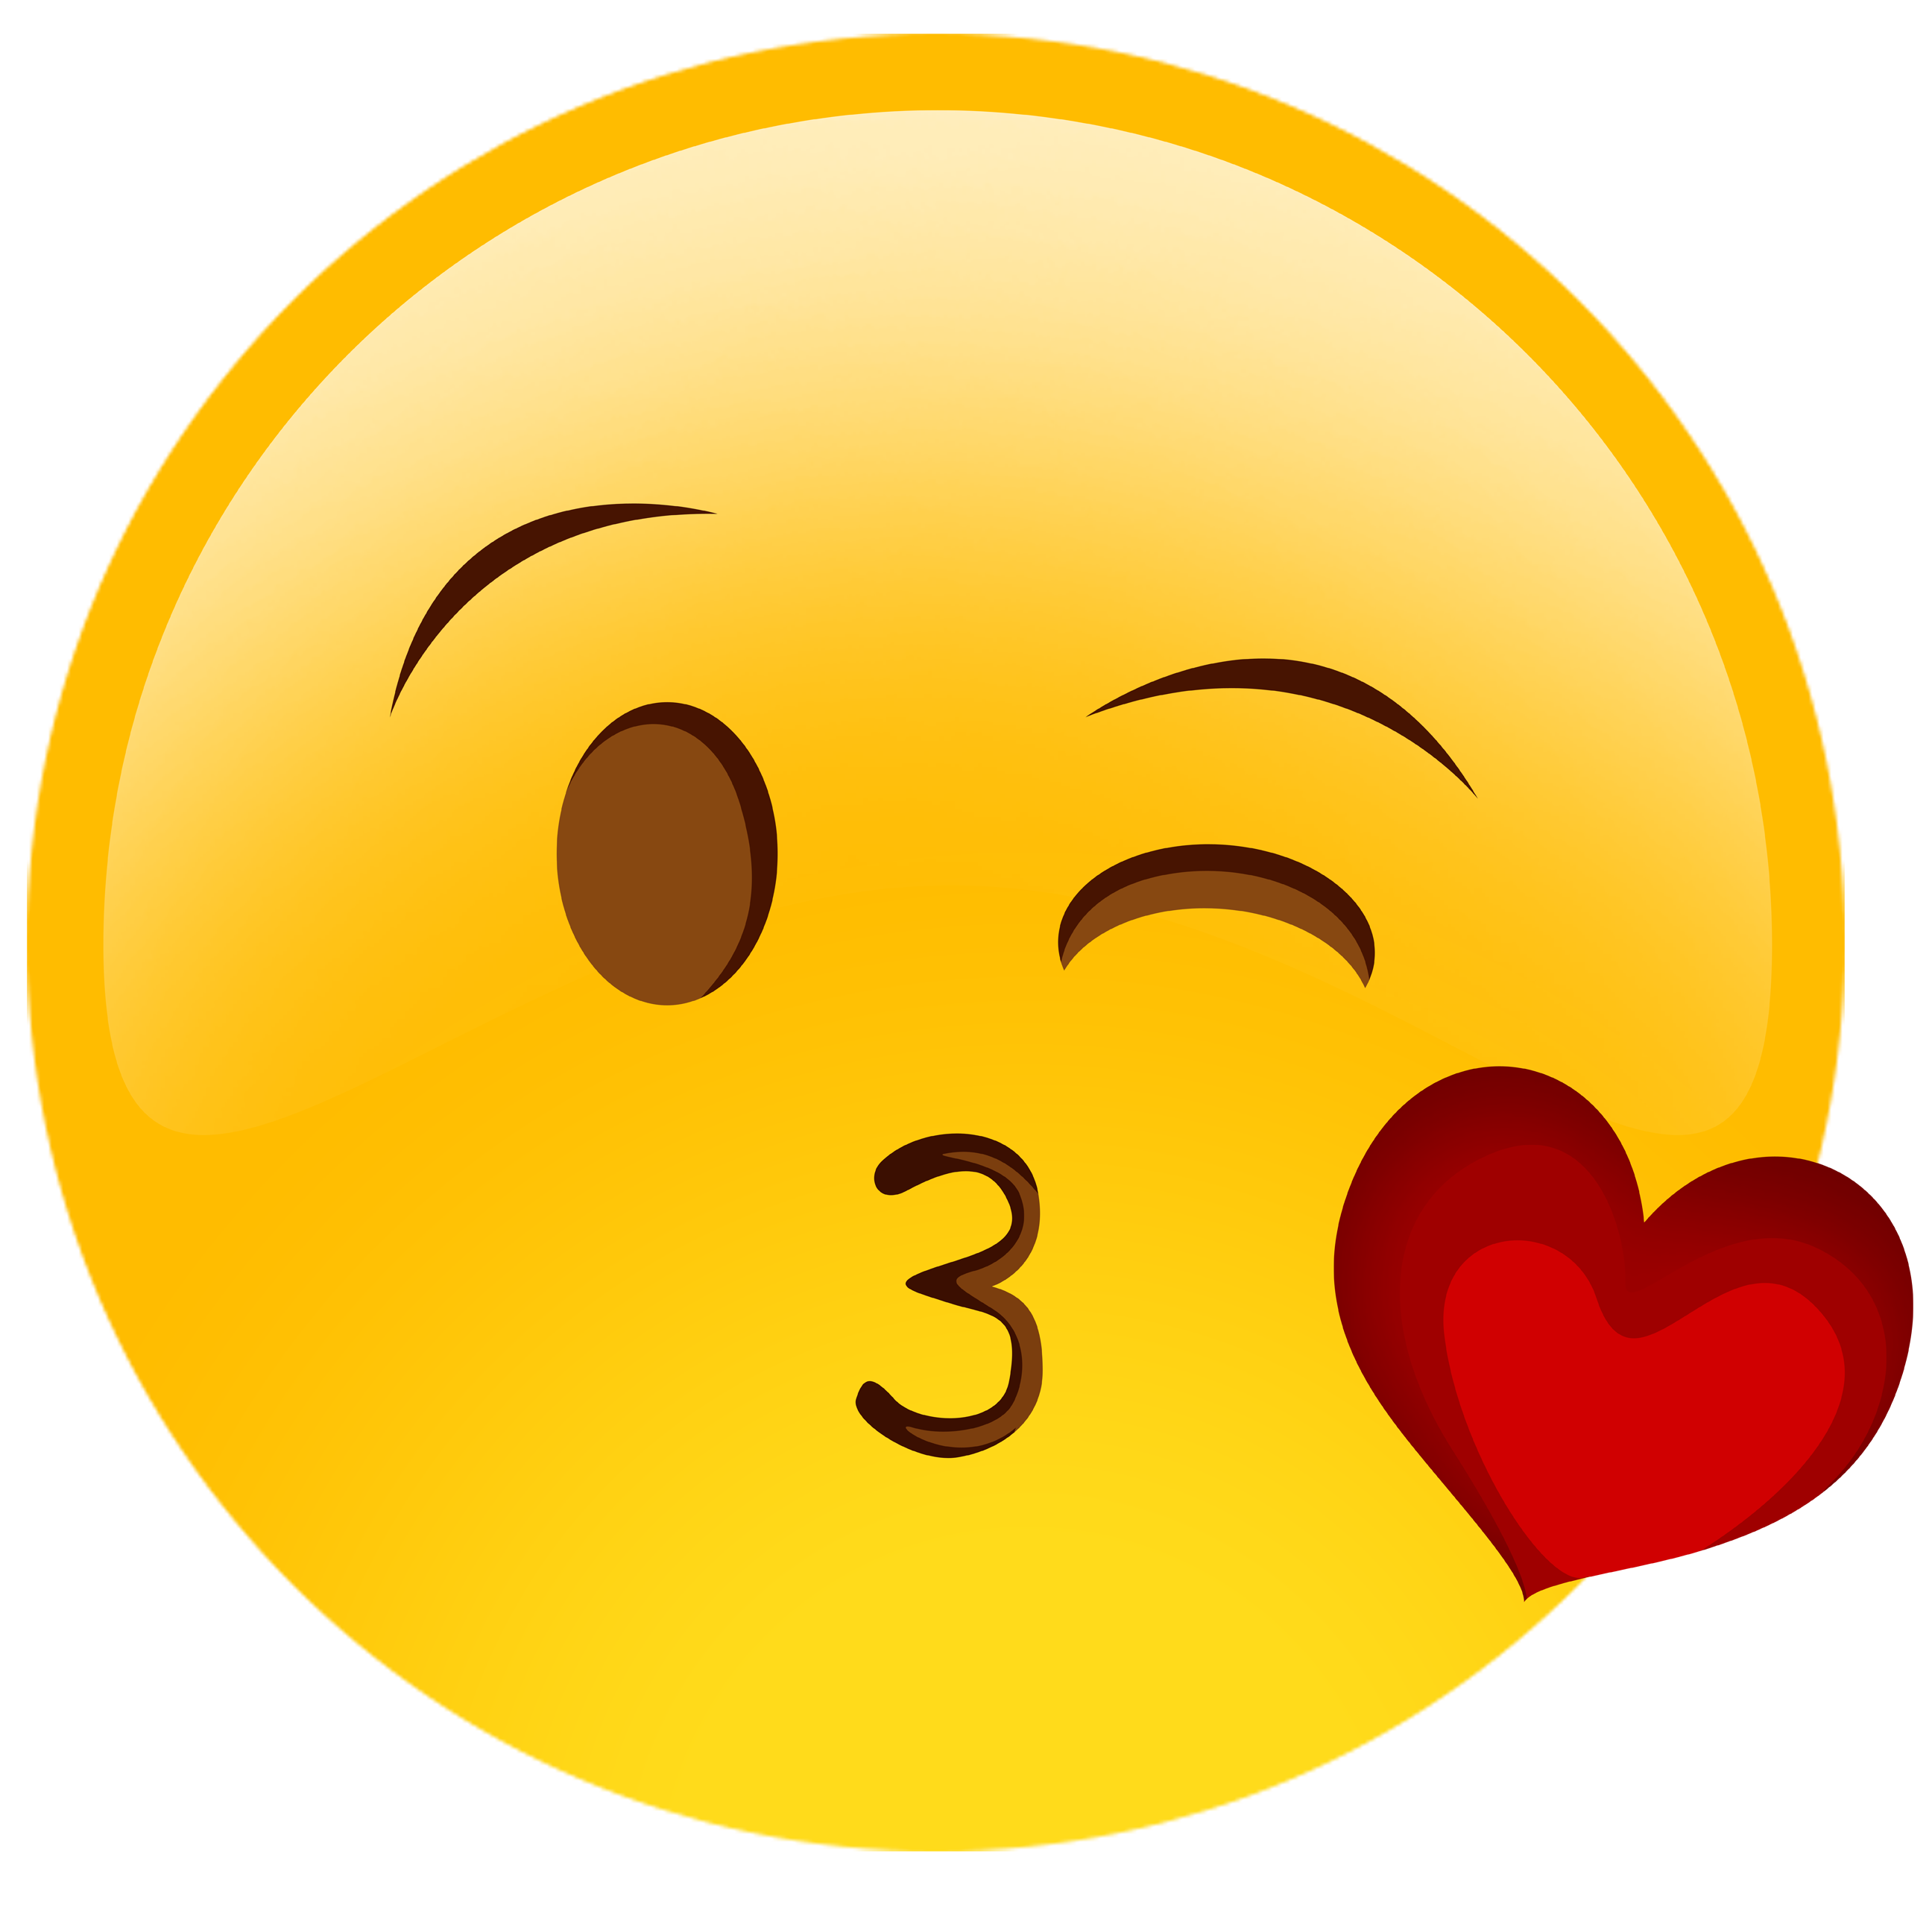 Face with Tears of Joy emoji Kiss Wink Smiley - faces png download